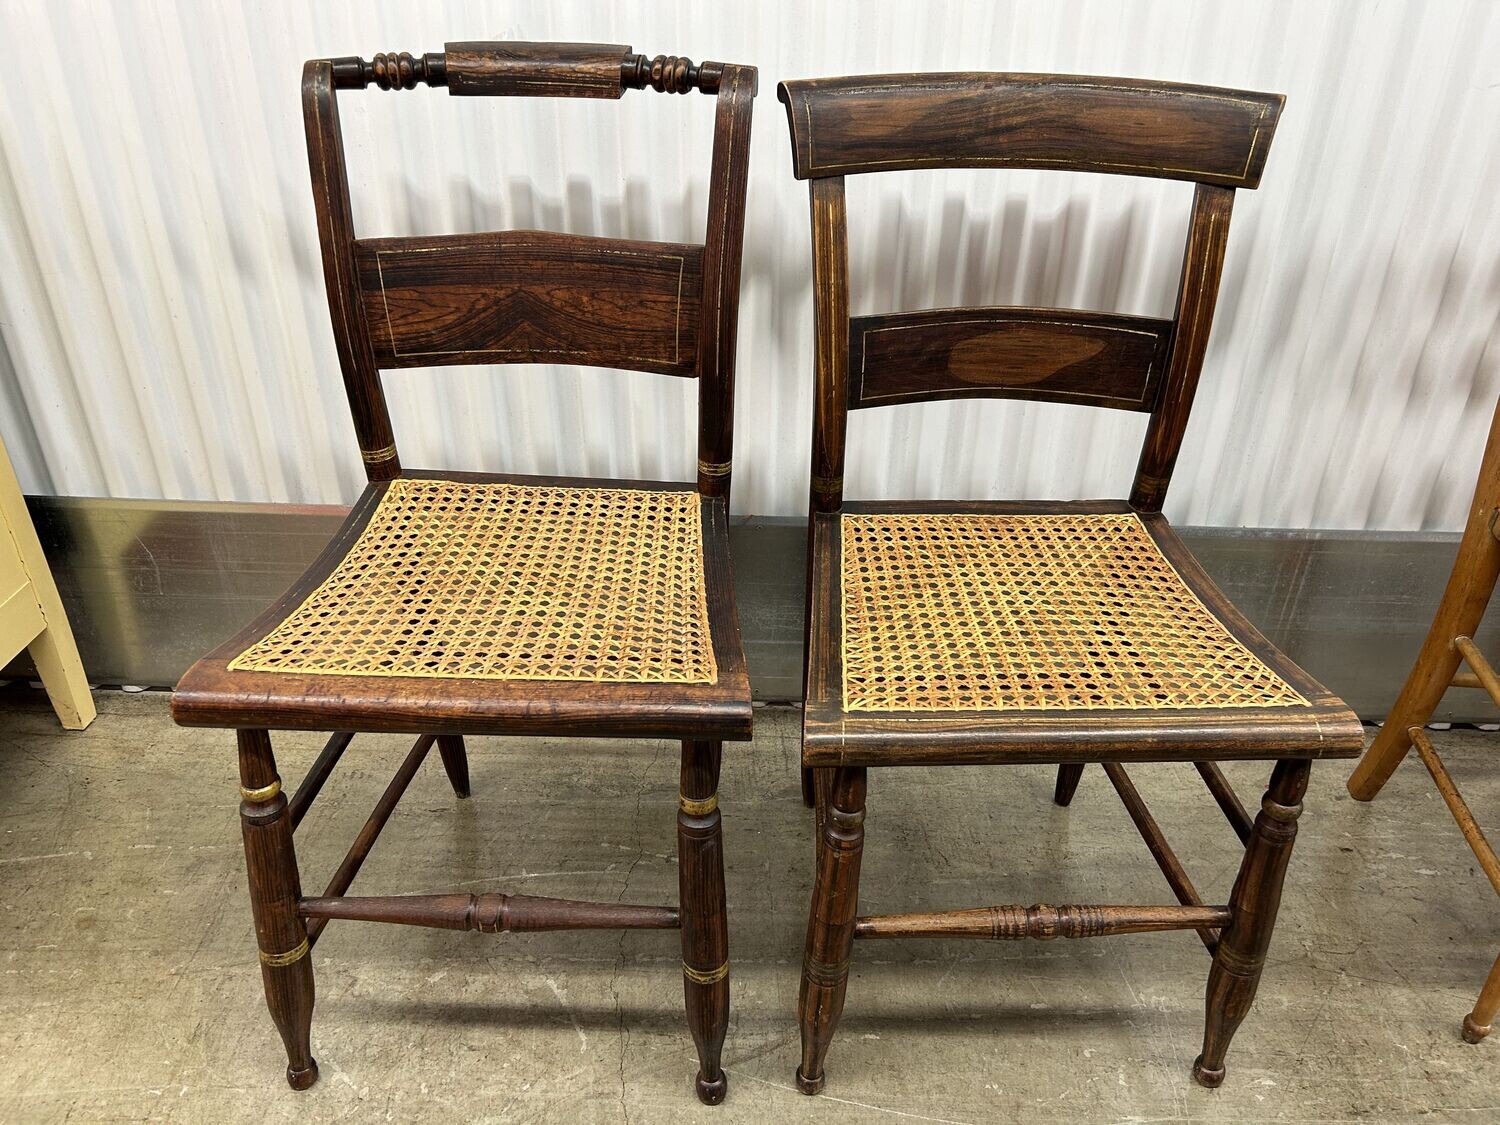 ** Pair of Brown Antique Chairs, caned seats #2125 ** 2 wks. to sell, full price